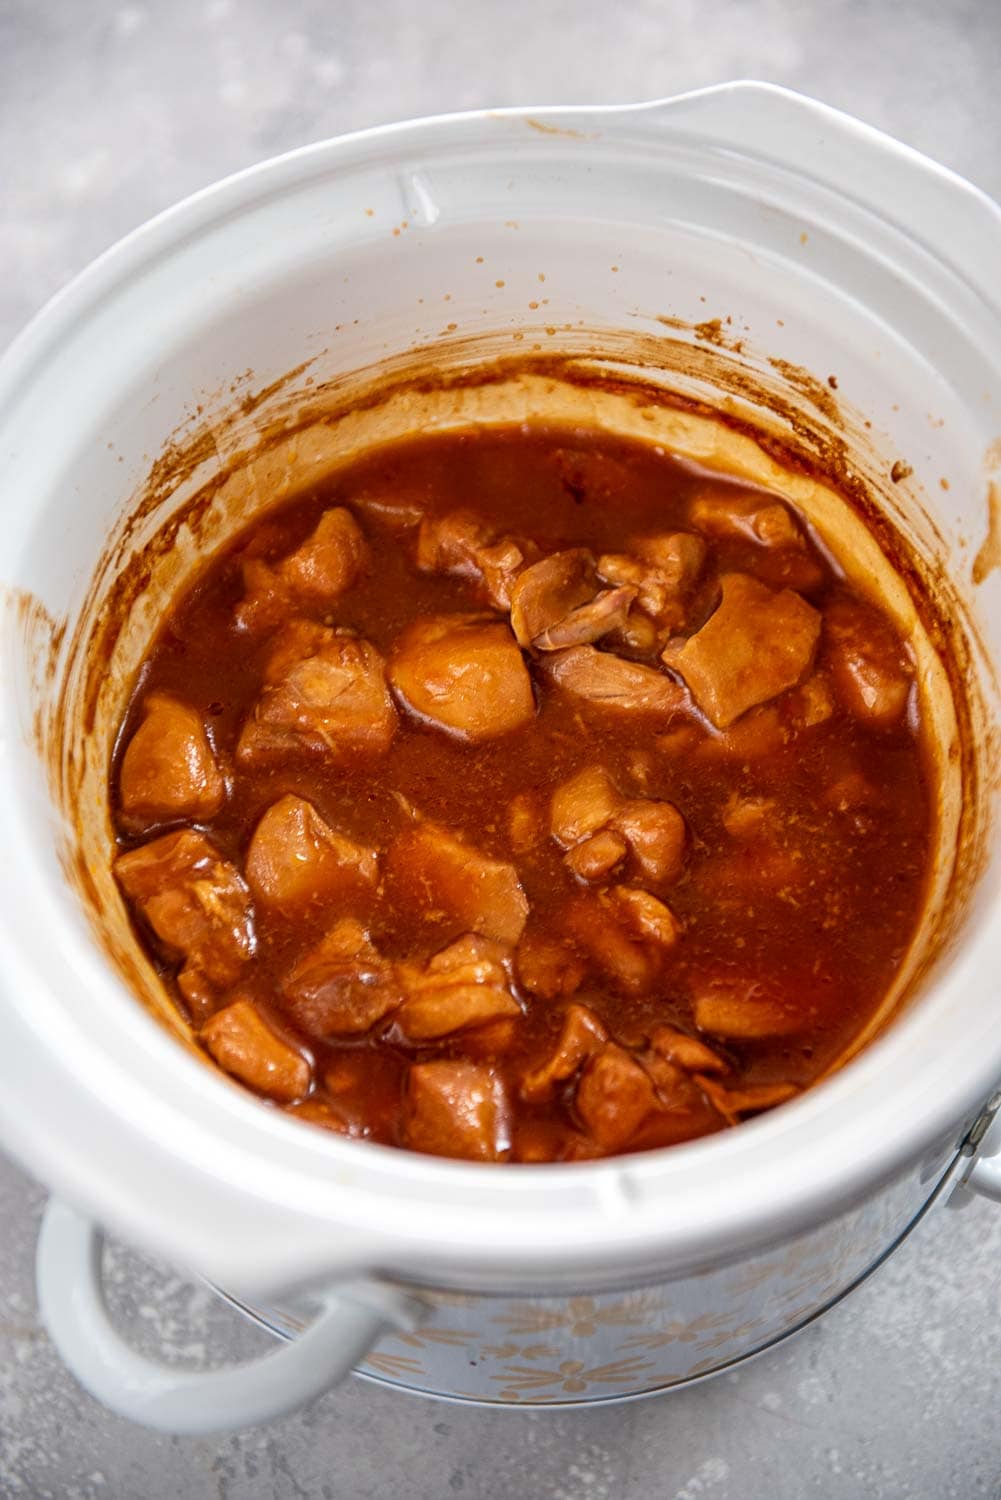 Cooked diced chicken in sauce mixture inside of slow cooker